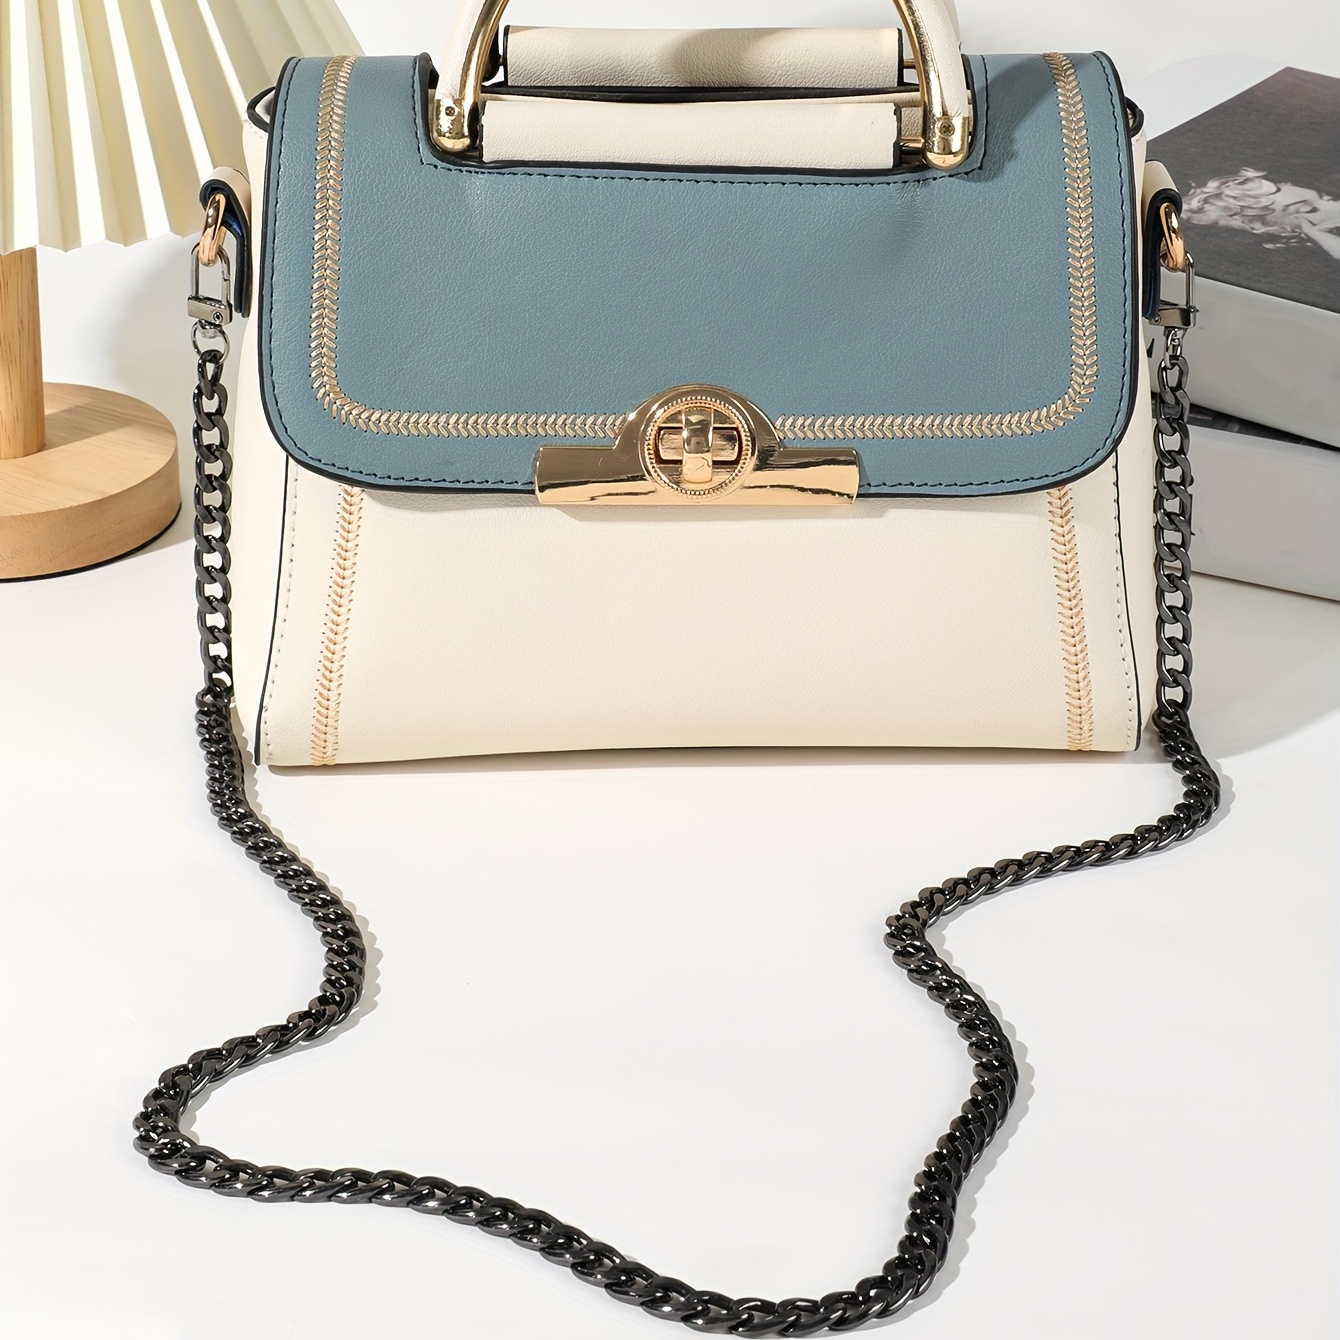 Simple Women's Bag Accessories Chain With Metal Buckles Iron Bag